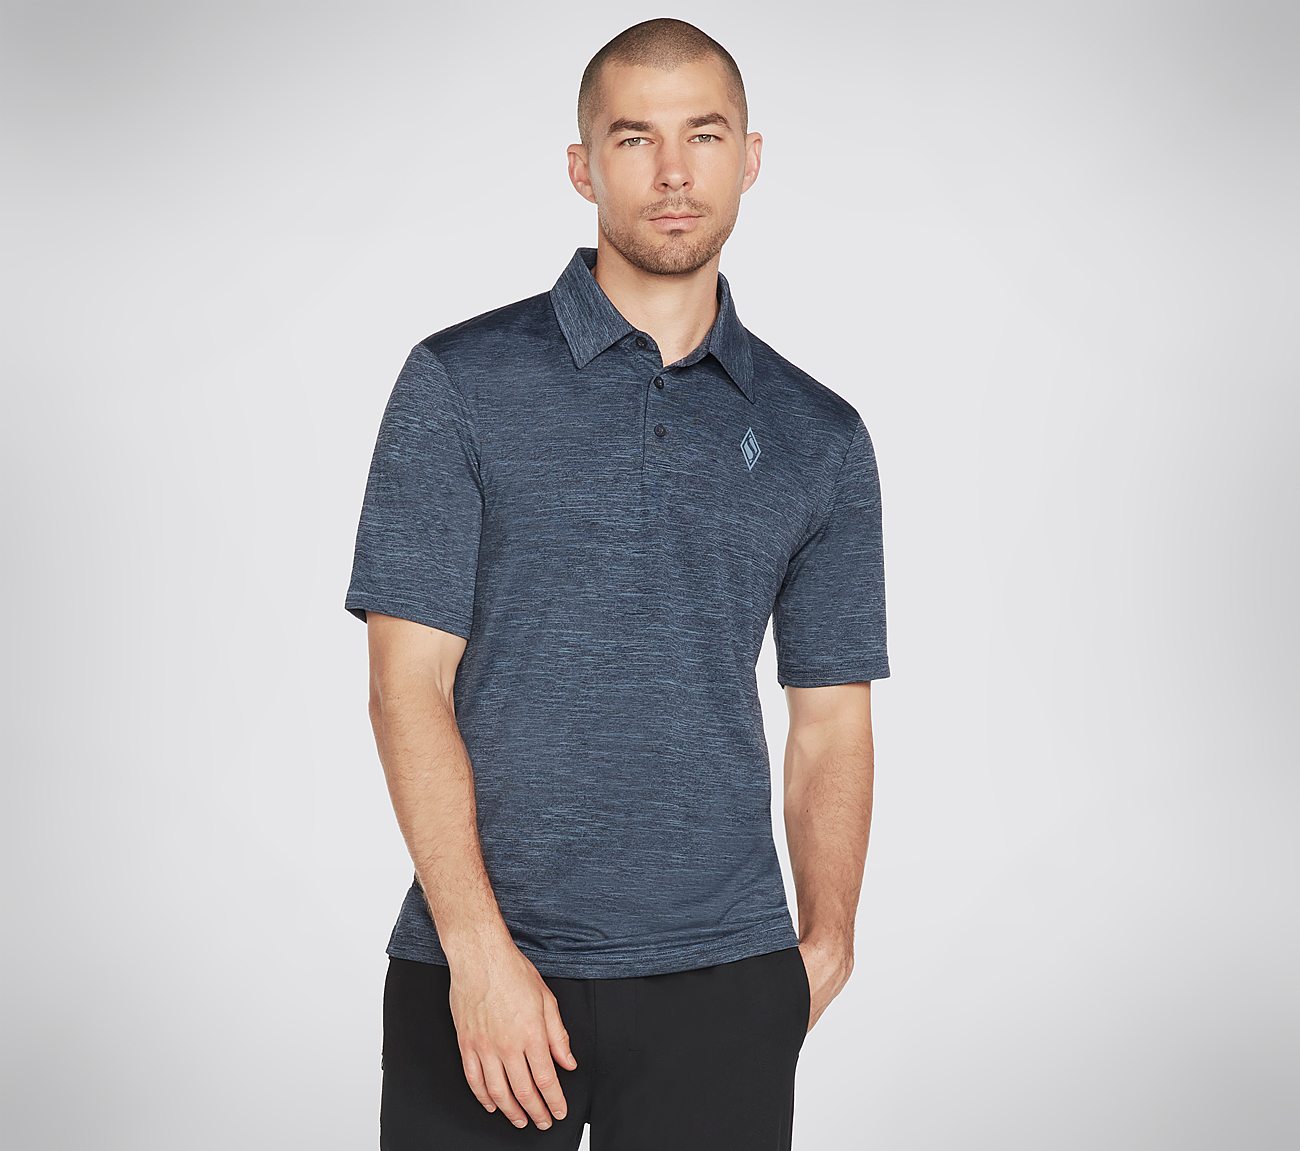 ON THE ROAD POLO, BLUE/GREY Apparels Lateral View